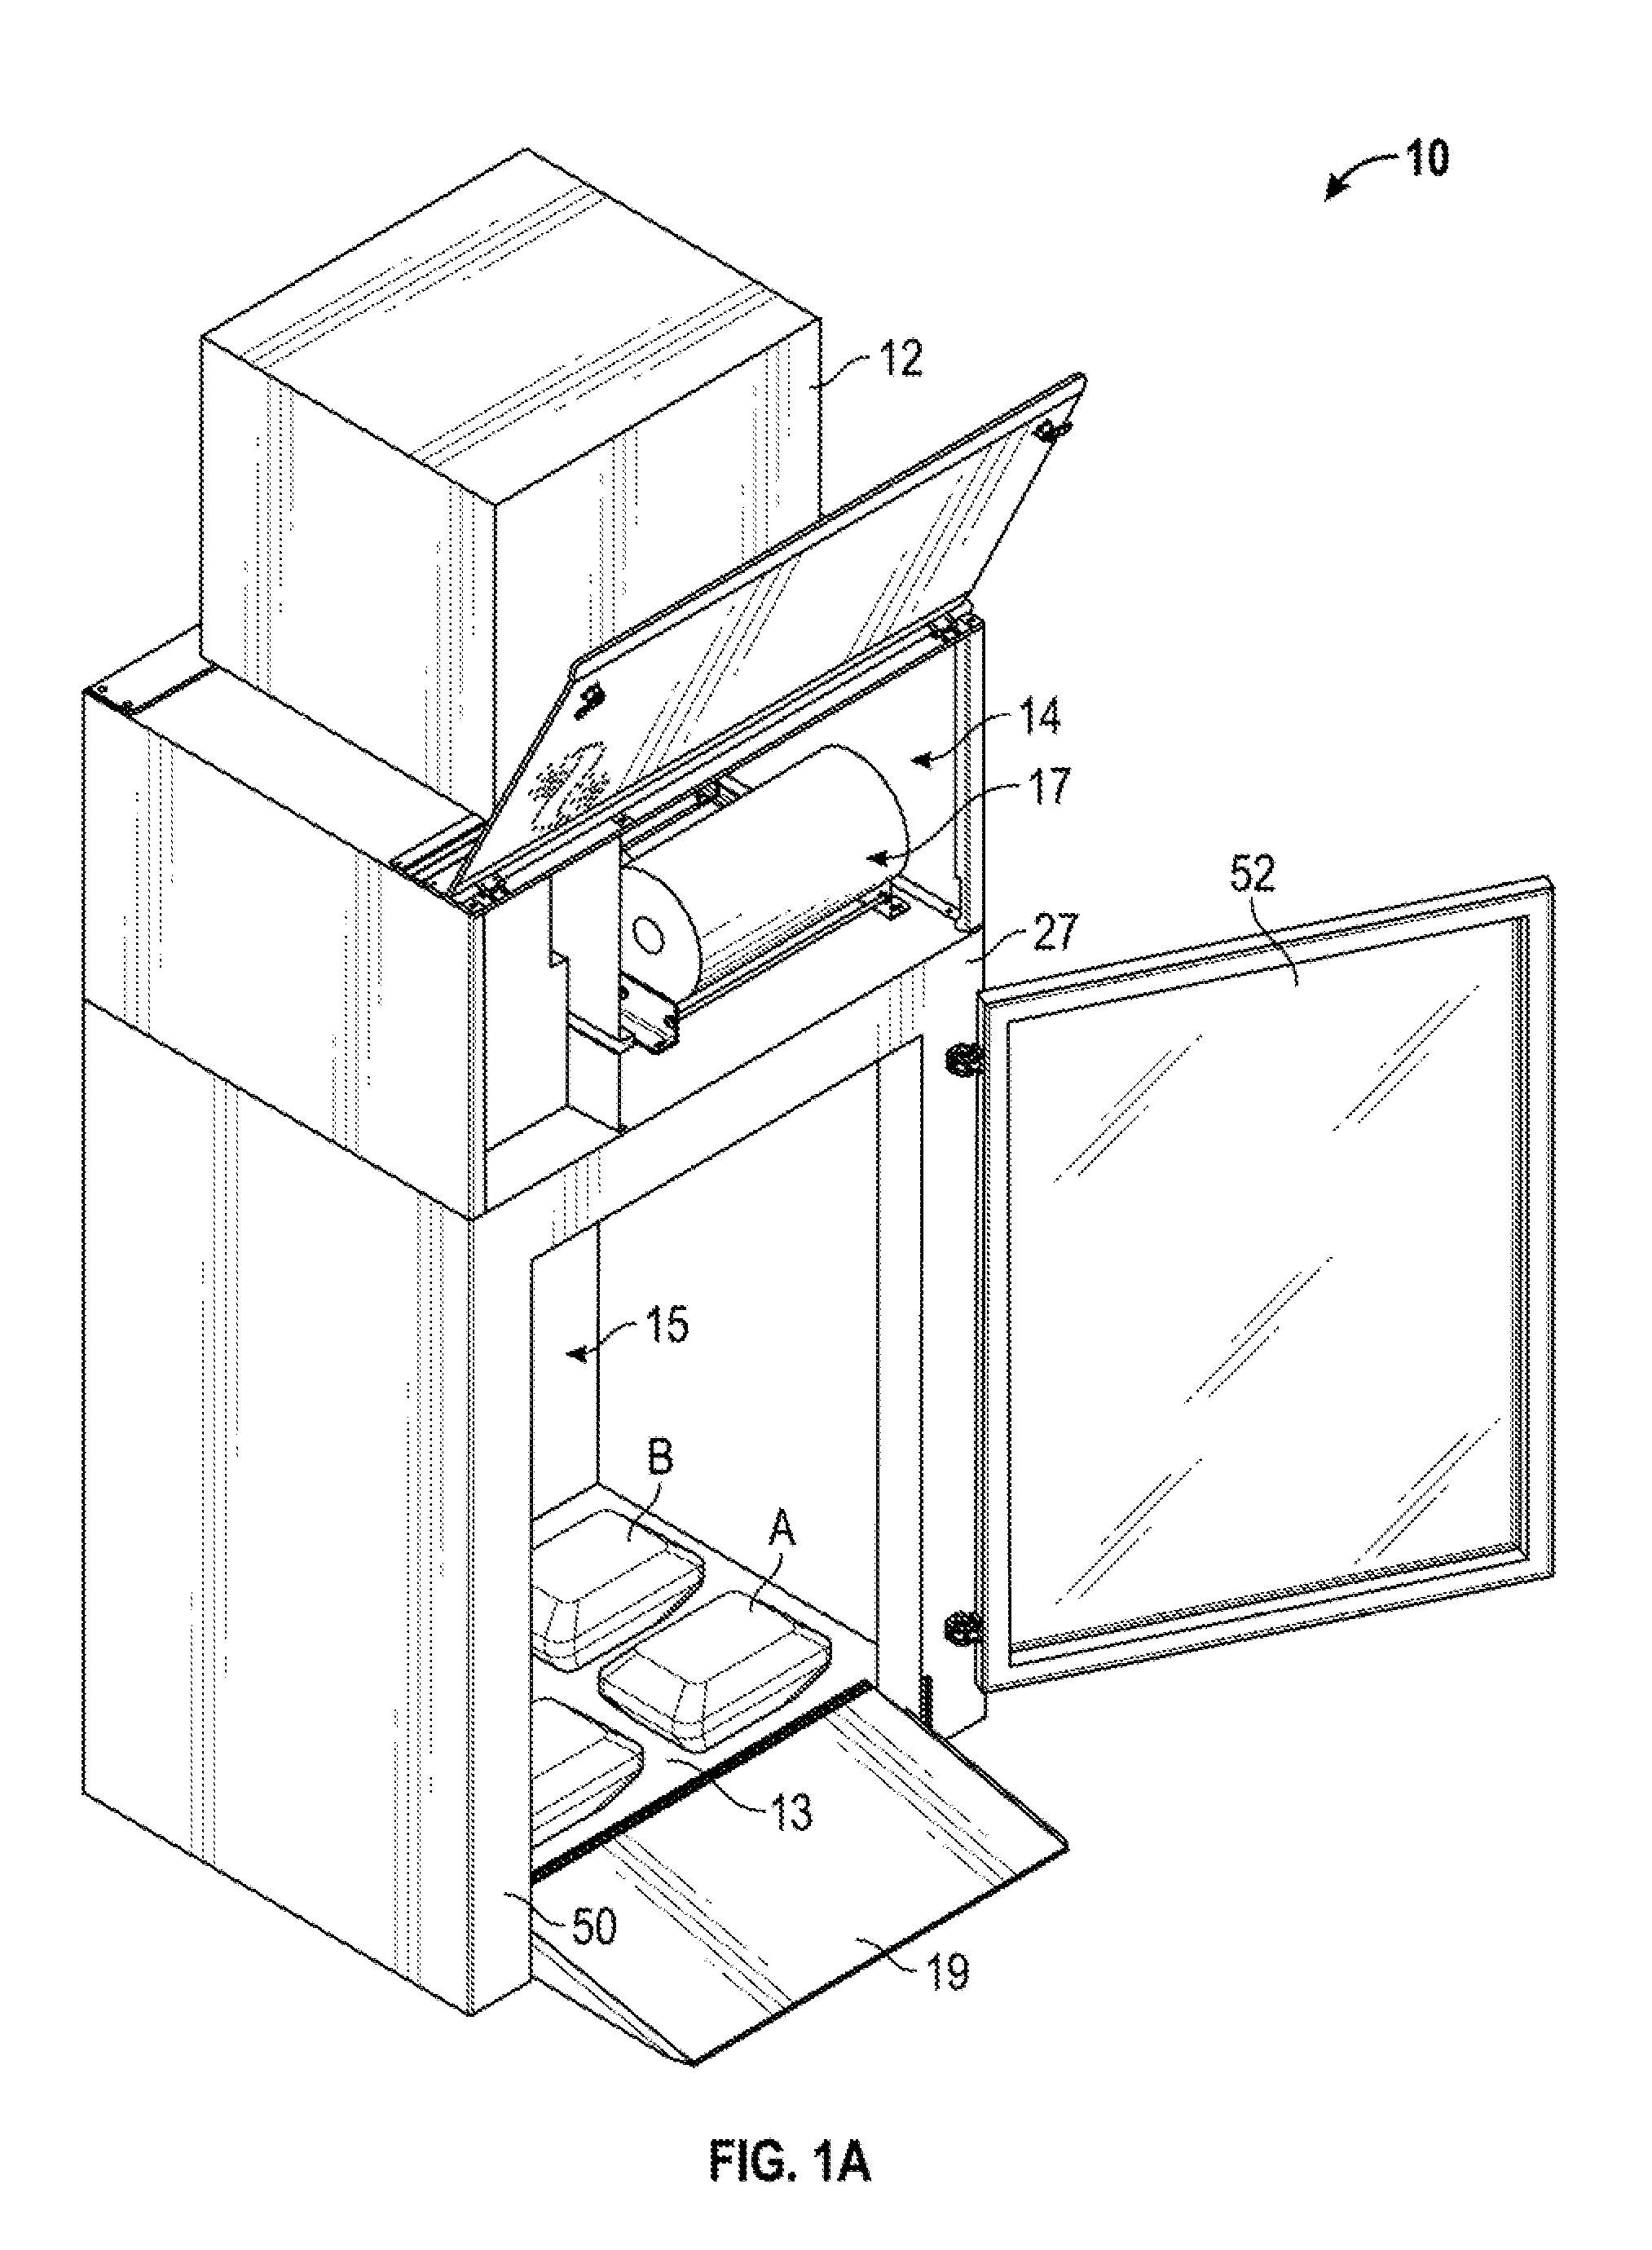 Method and apparatus for storing and dispensing bagged ice